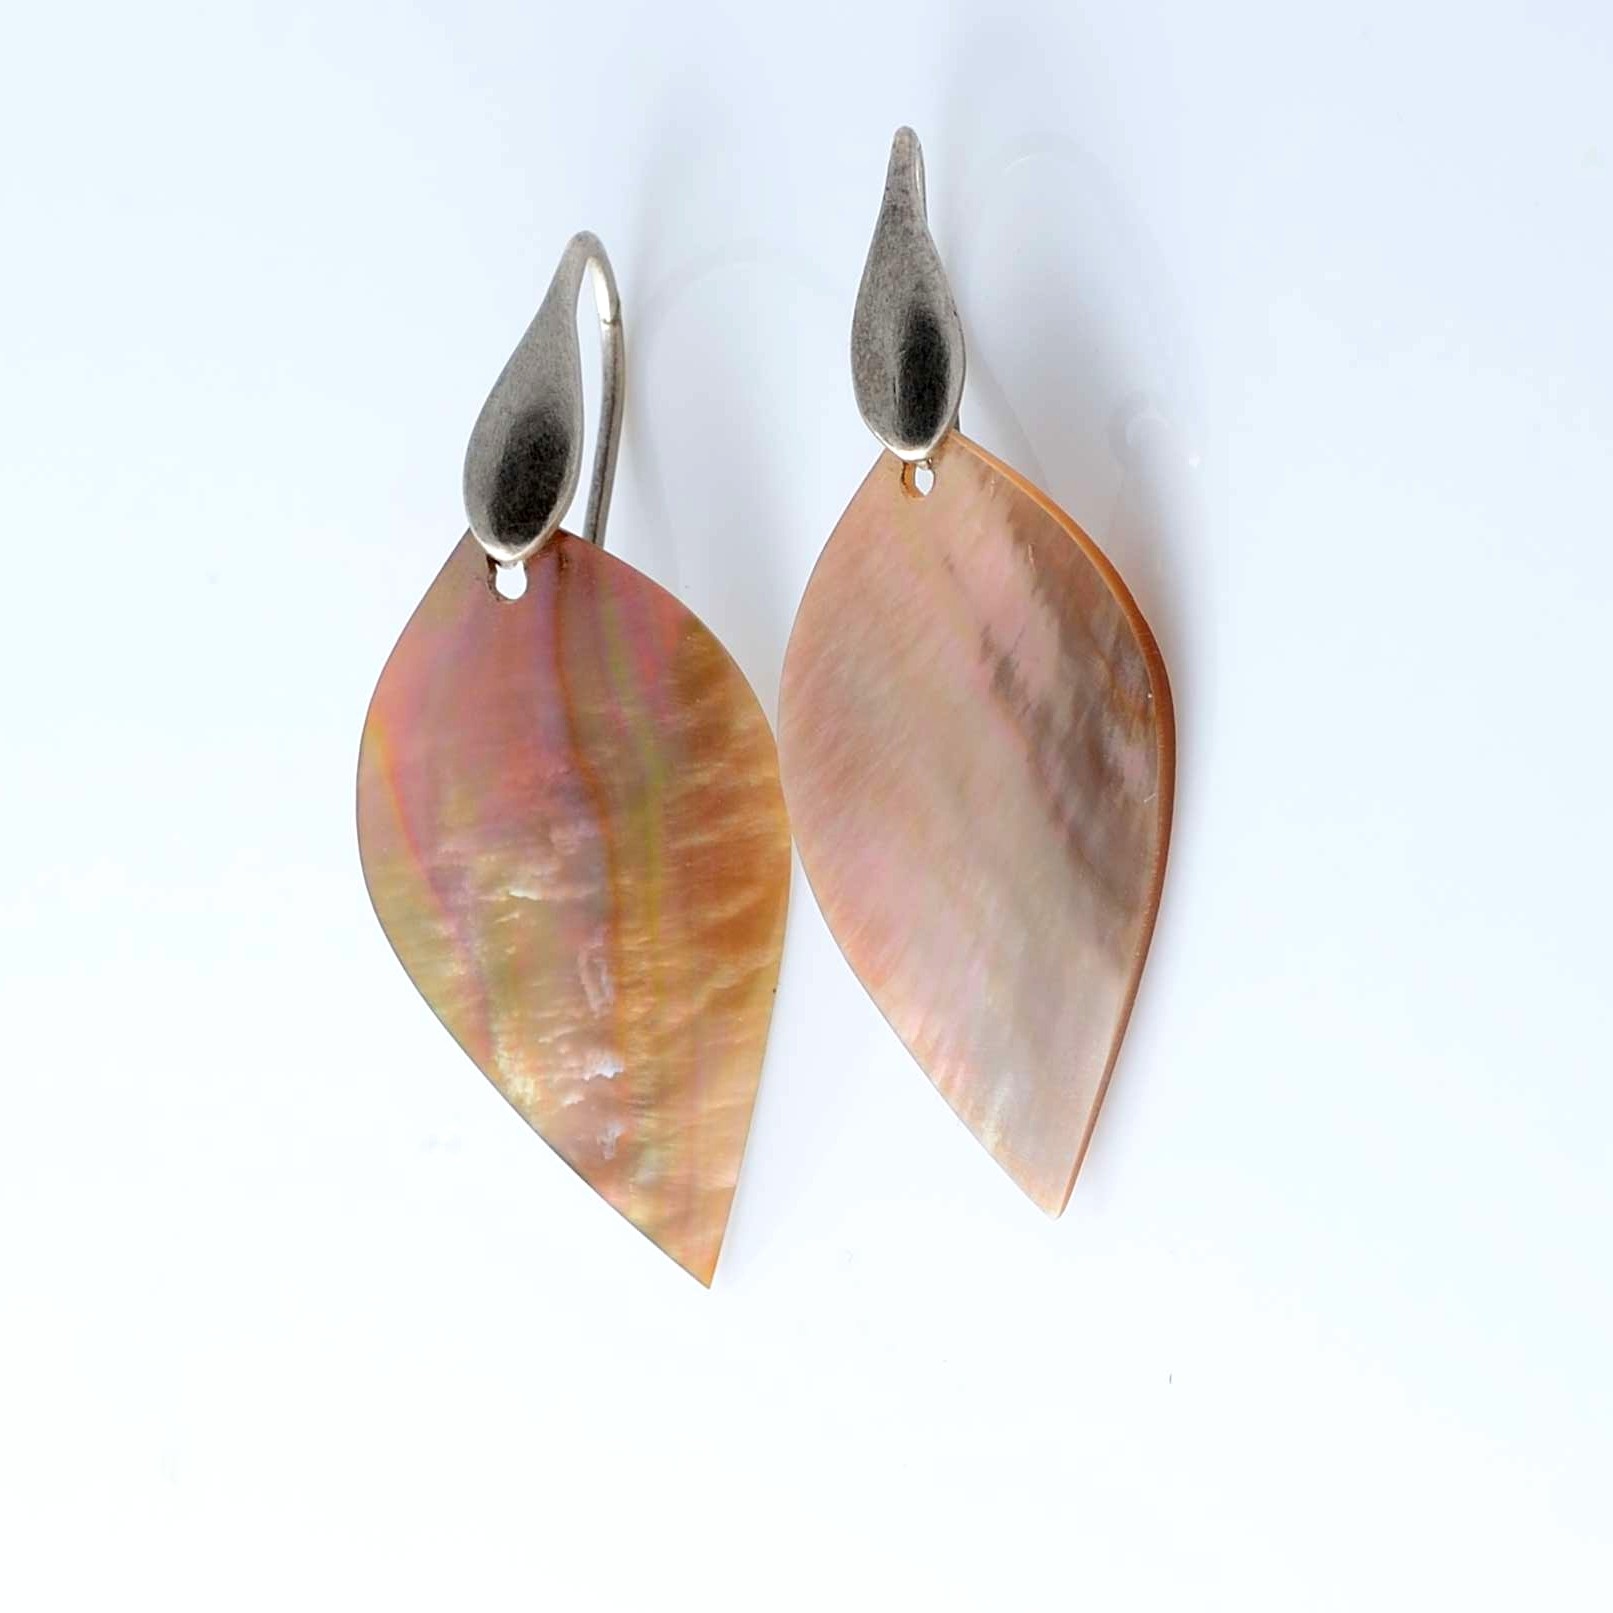 Silver earrings and shell